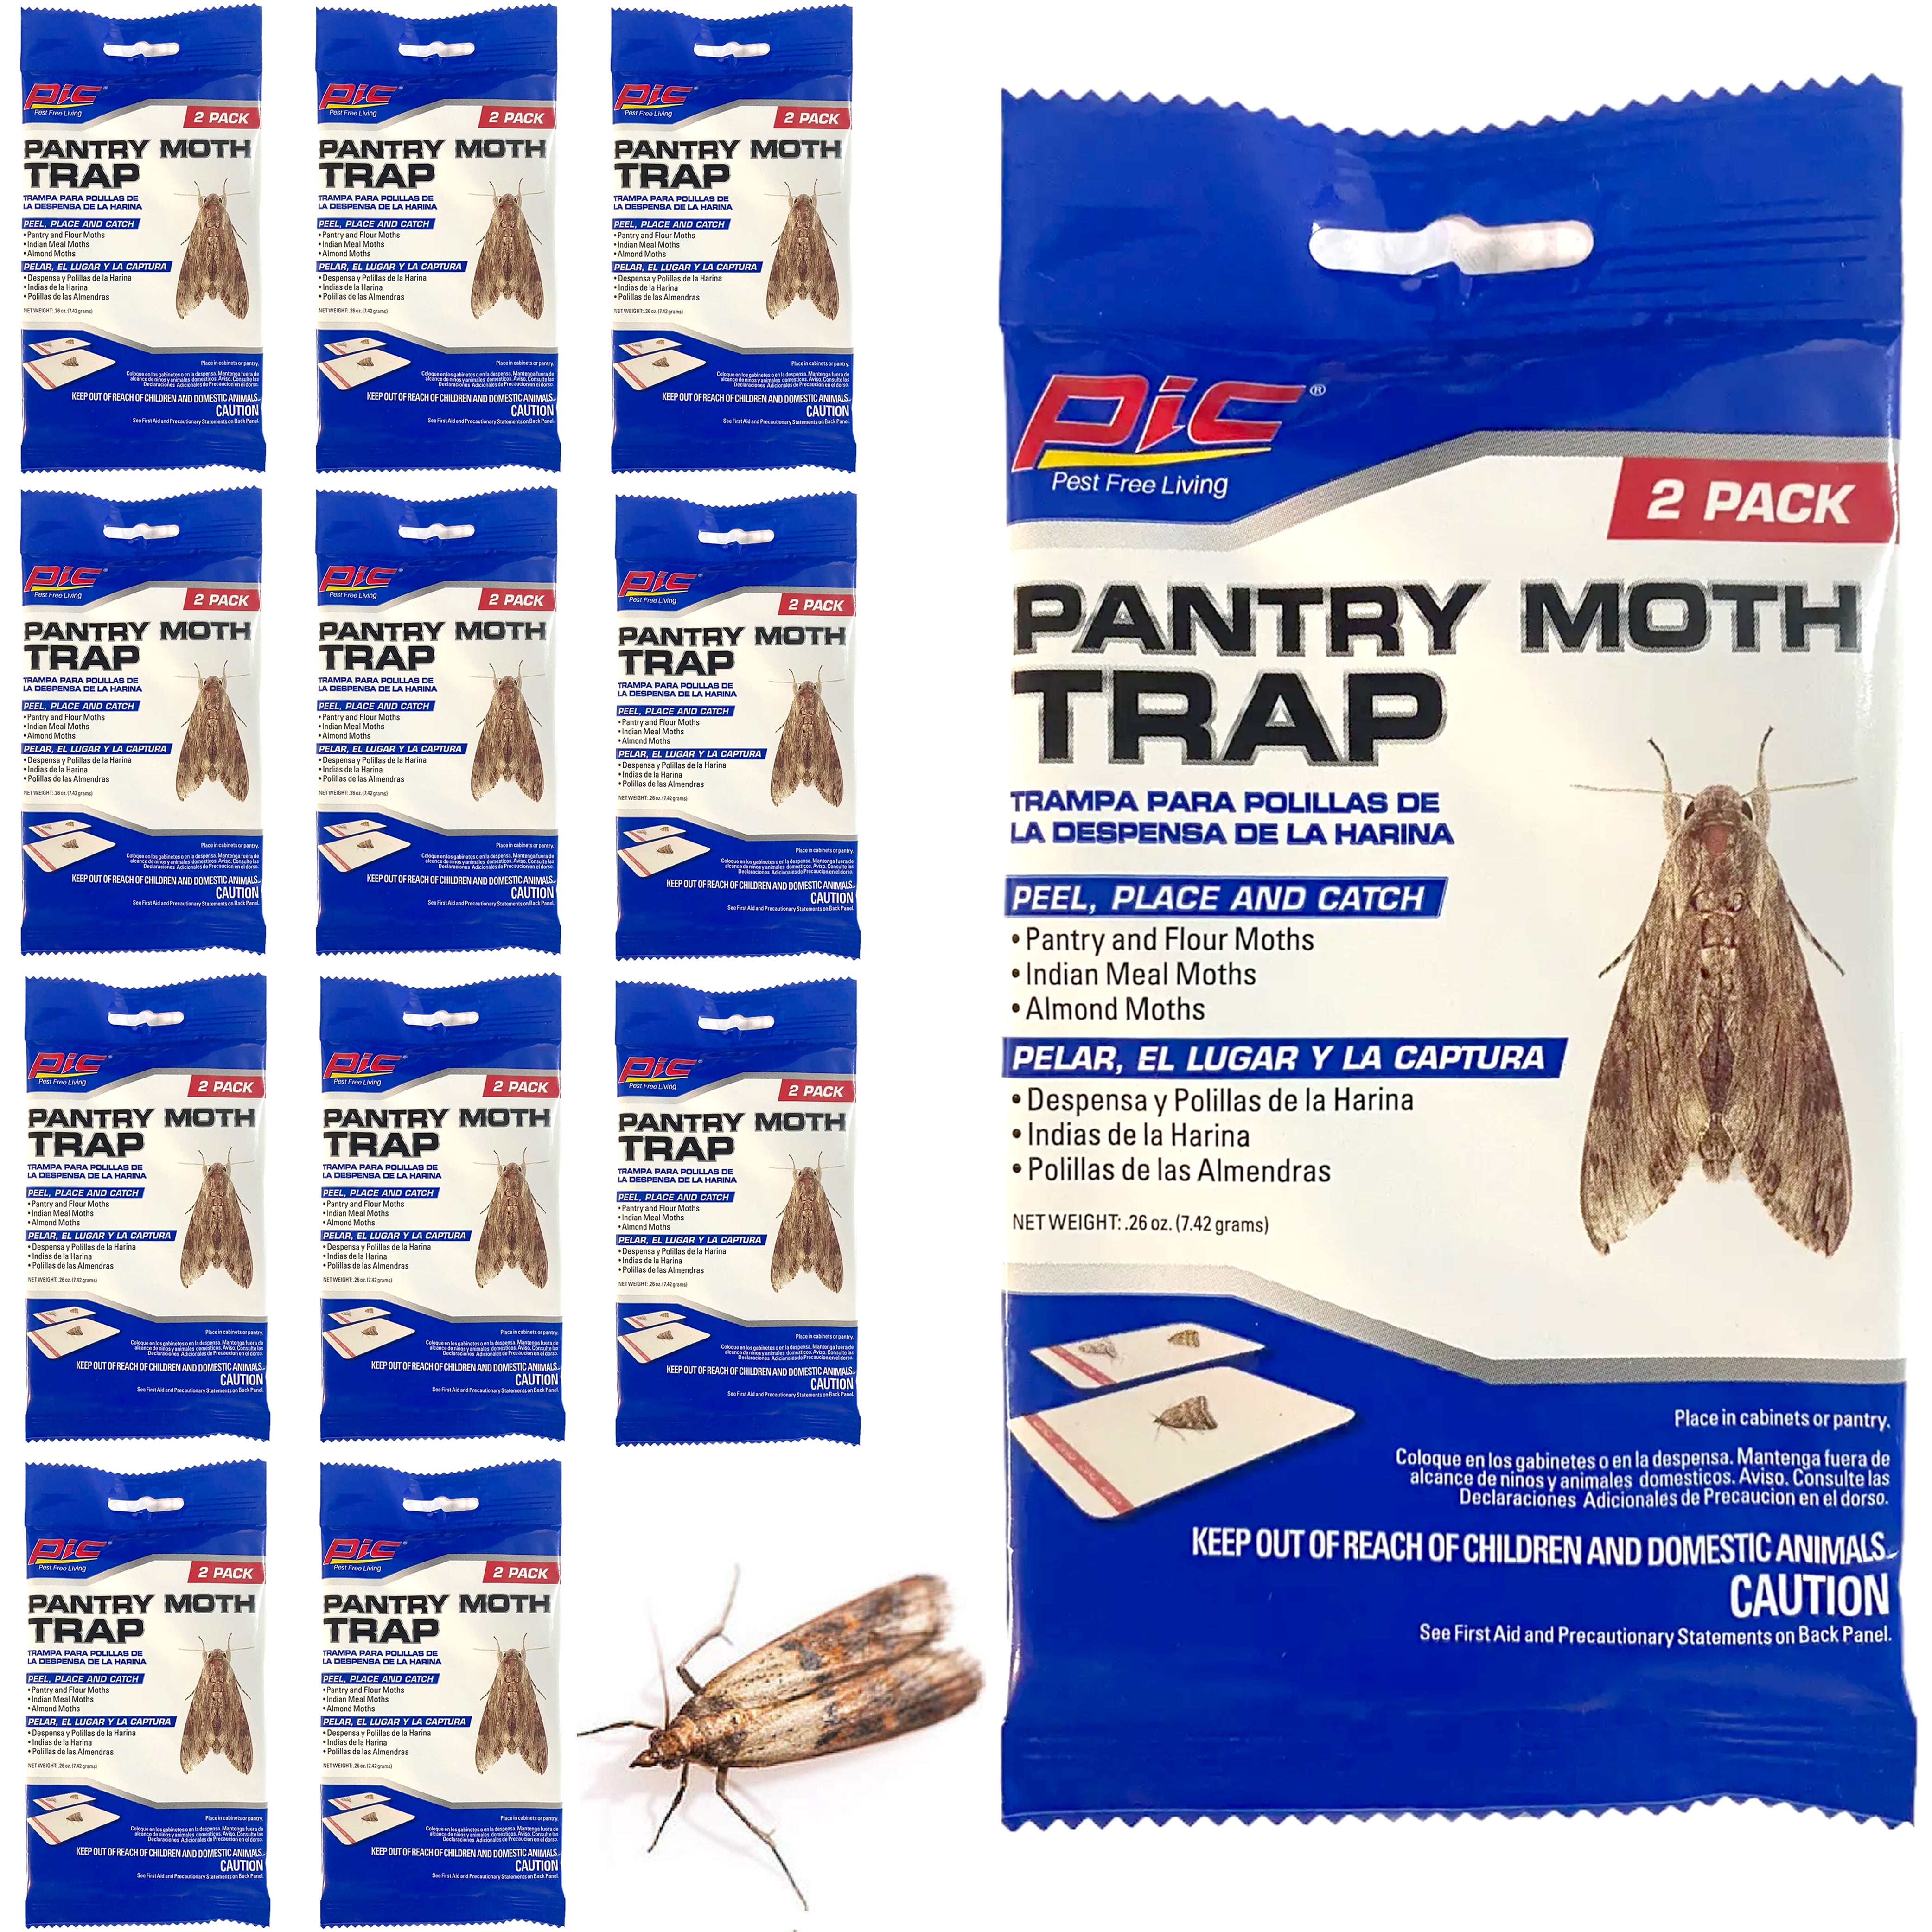 The Terro Pantry Moth Trap Will Catch And Get Rid Of Pantry Moths